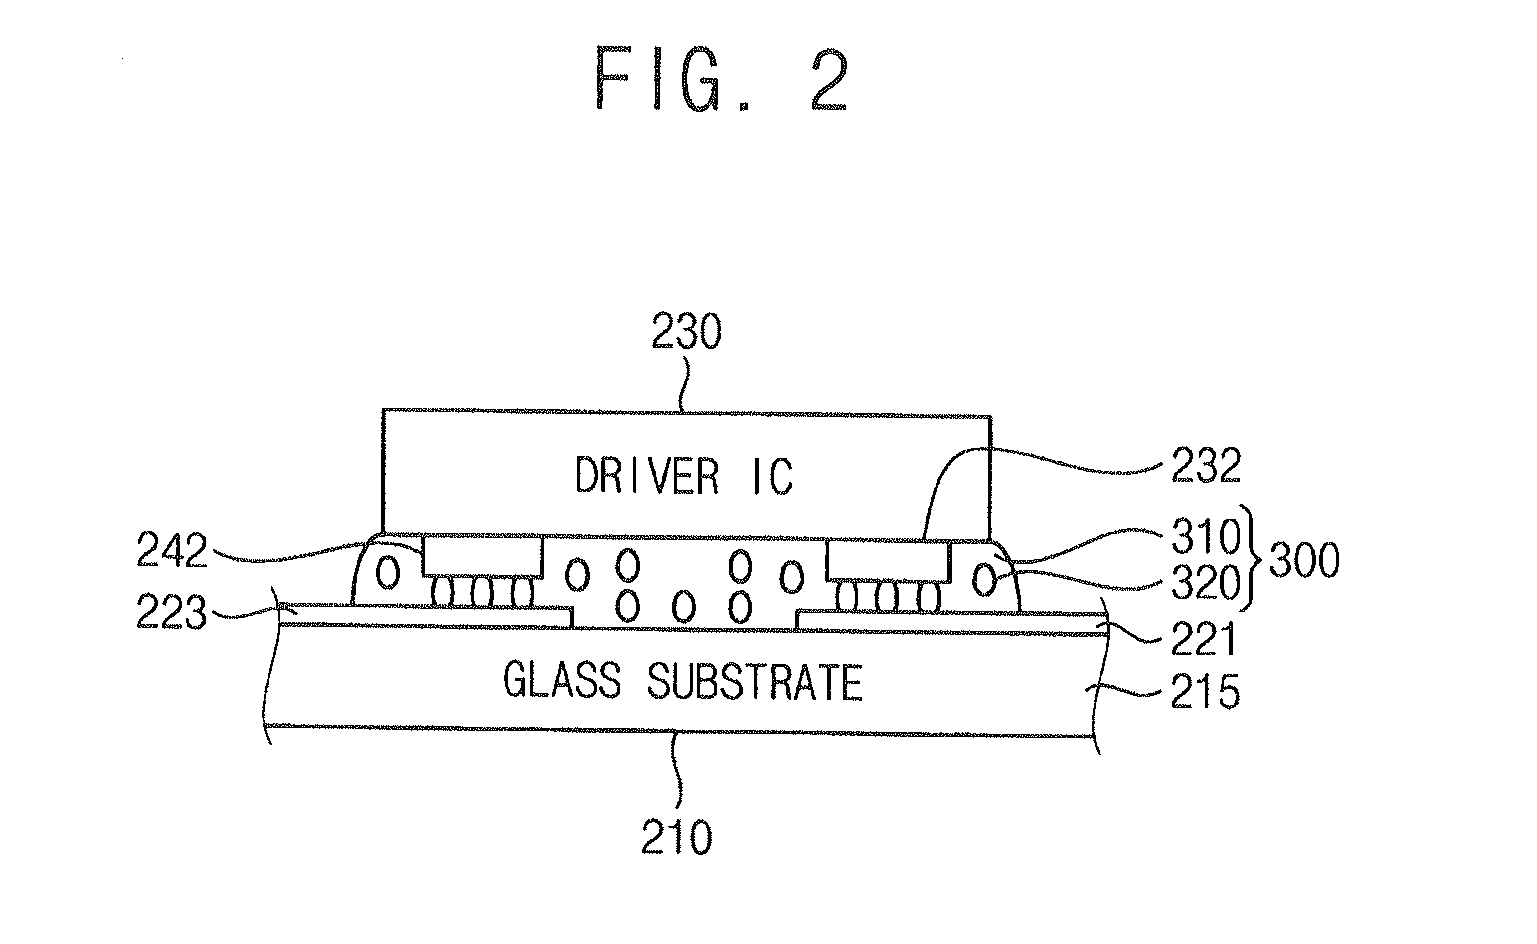 Display device and bonding test system